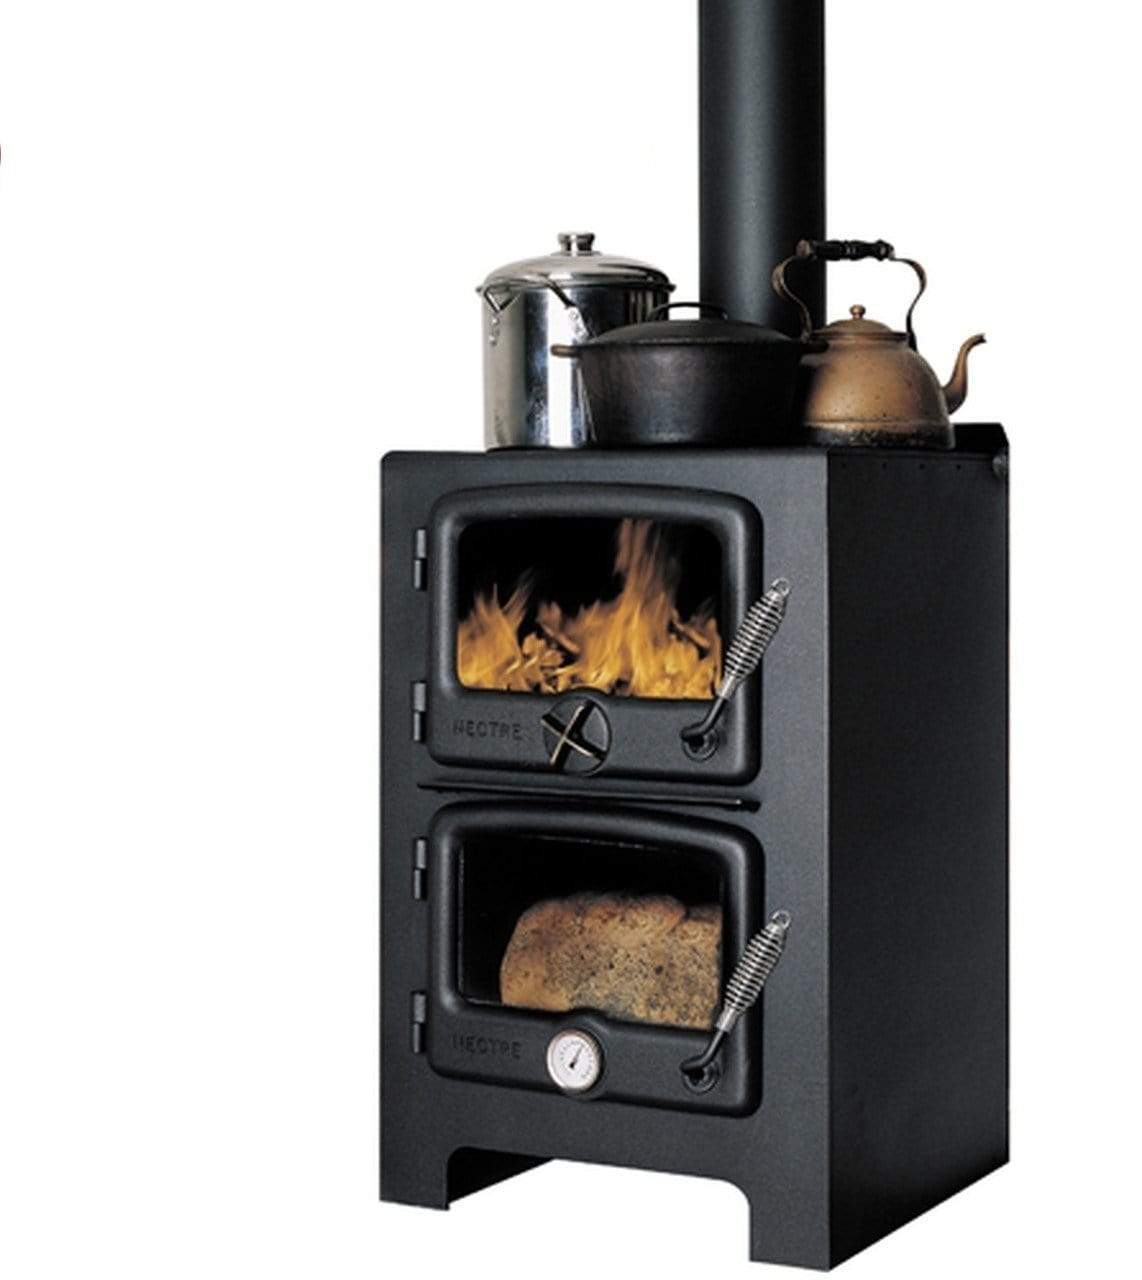 Dimplex Wood burning Fires Dimplex N350W Nectre 30,000 Btu Wood-fired Oven With Water Jacket